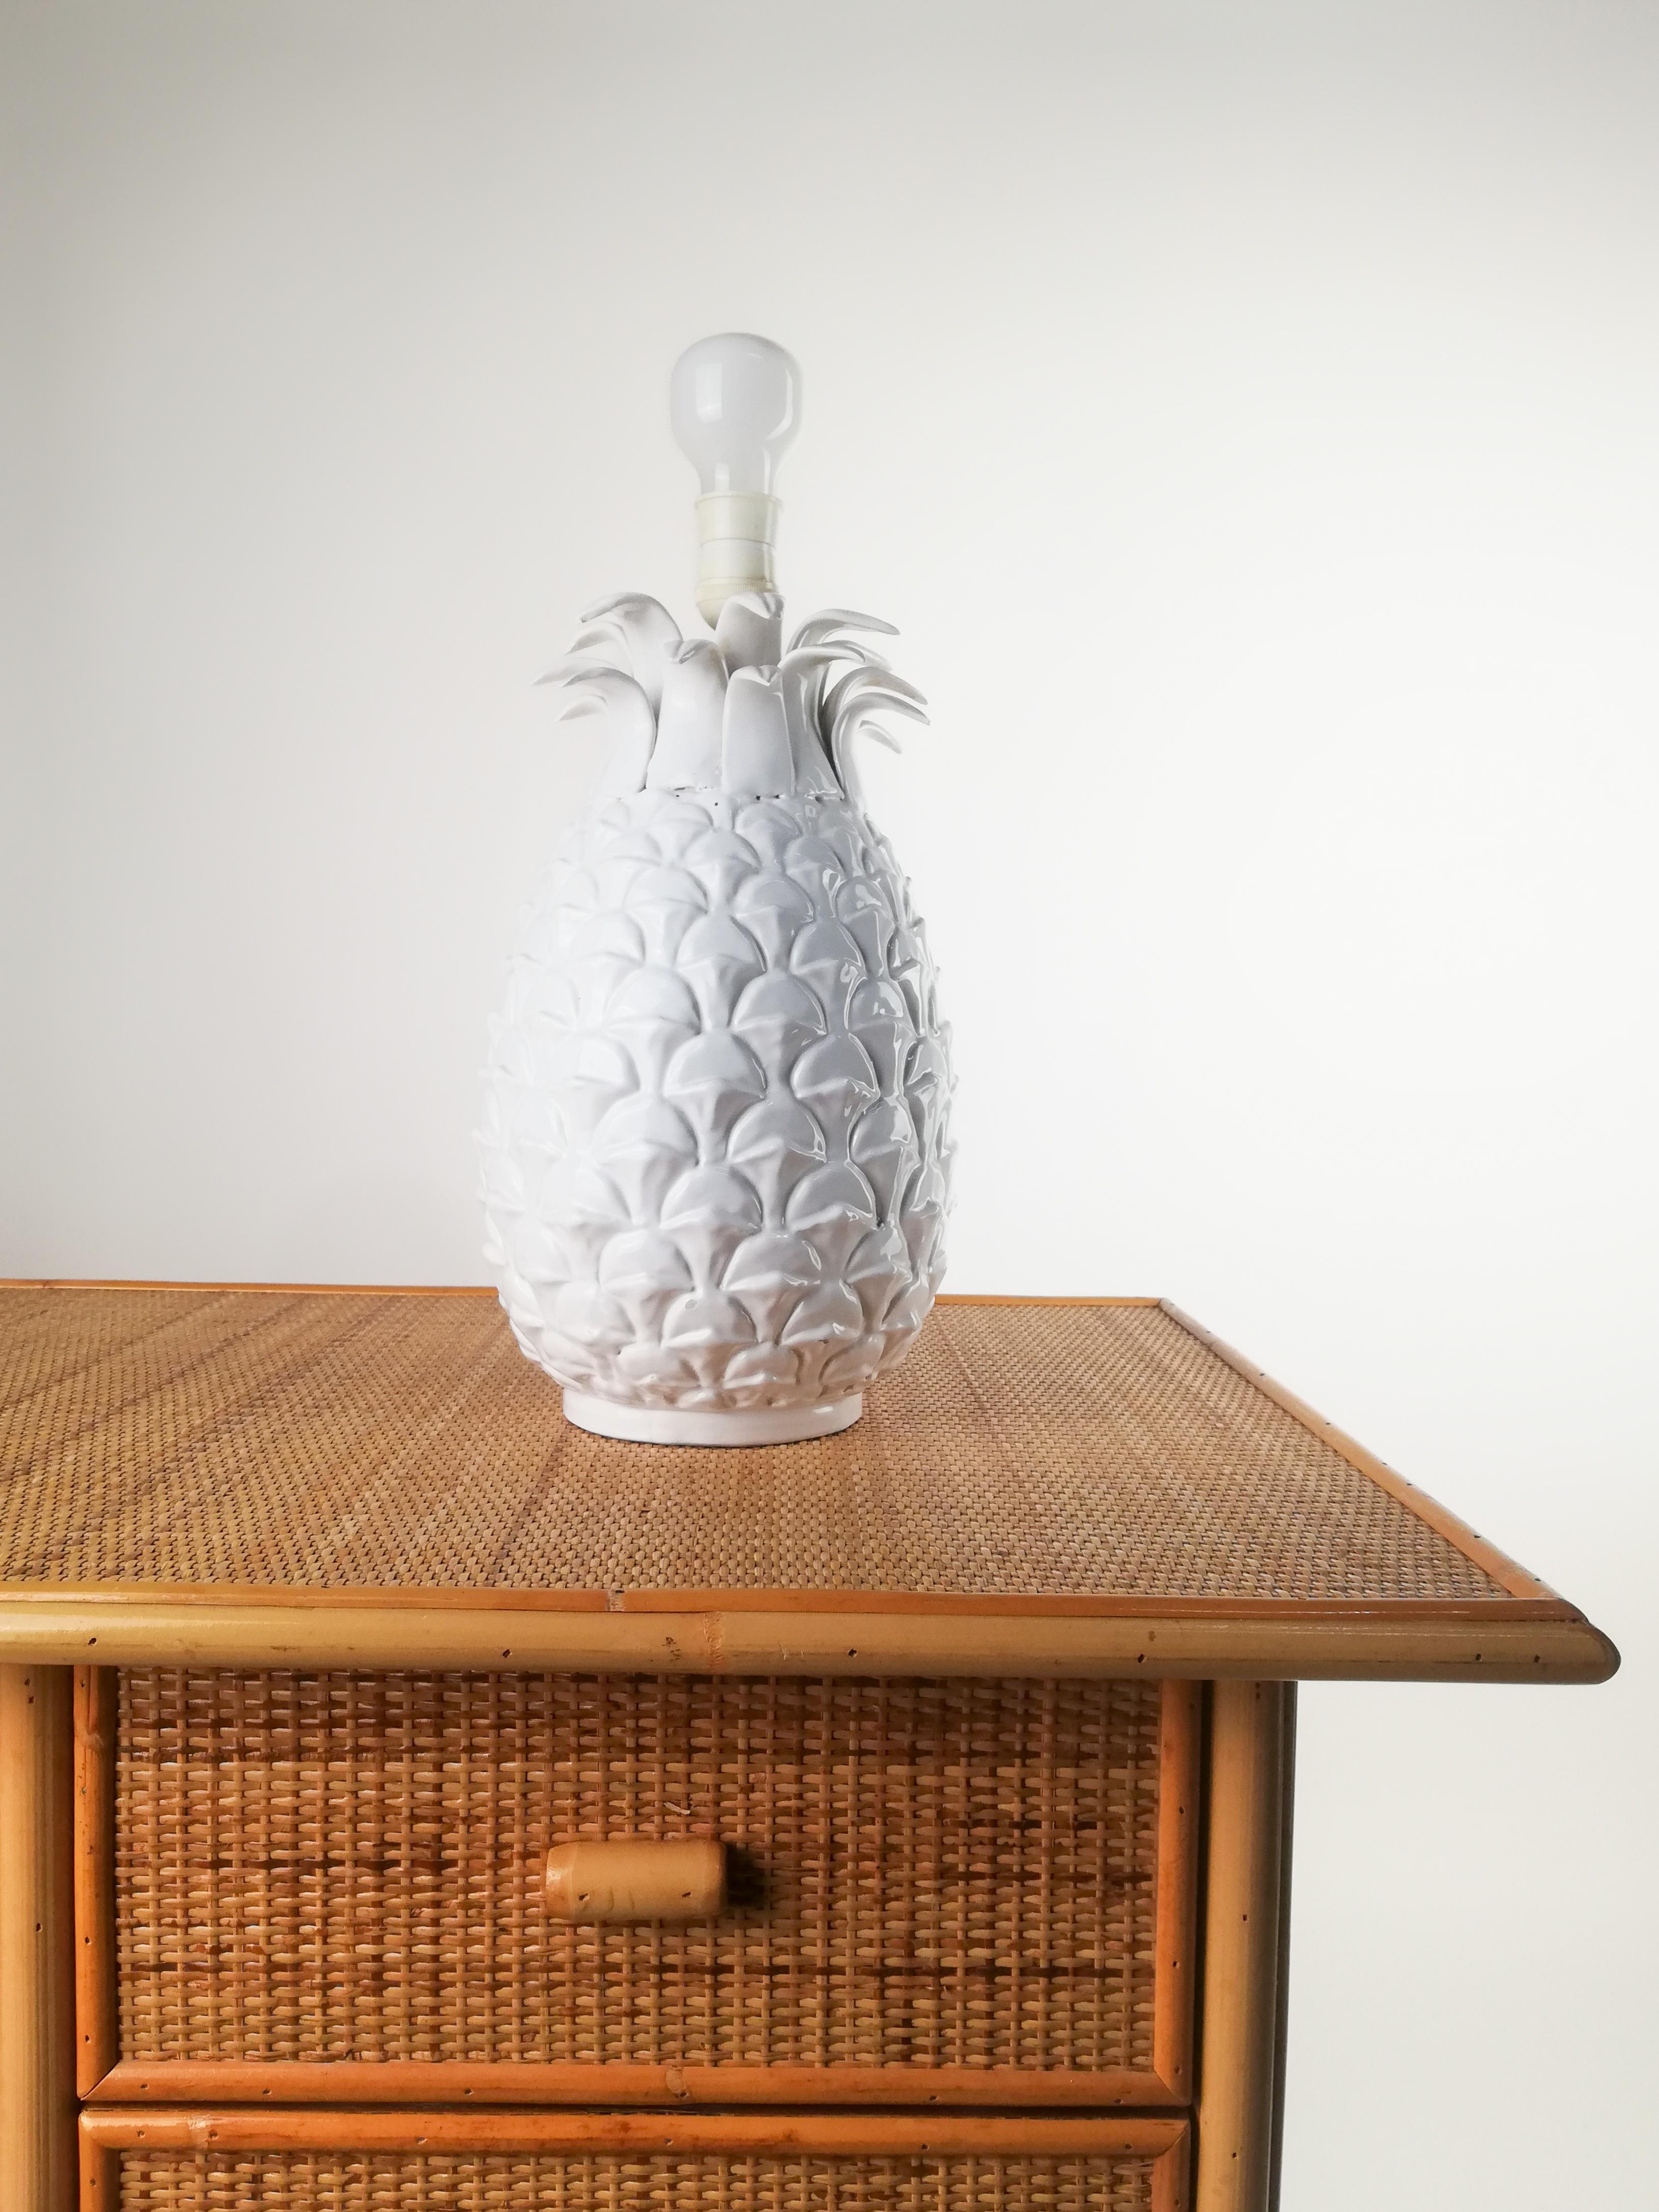 A very decorative vintage table lamp in the shape of a out of size pineapple.
It was hand made in Italy between the 60s and the 70s in glazed ceramic like the Tommaso Barbi productions of the period.
The pineapple zest is reproduced in a very